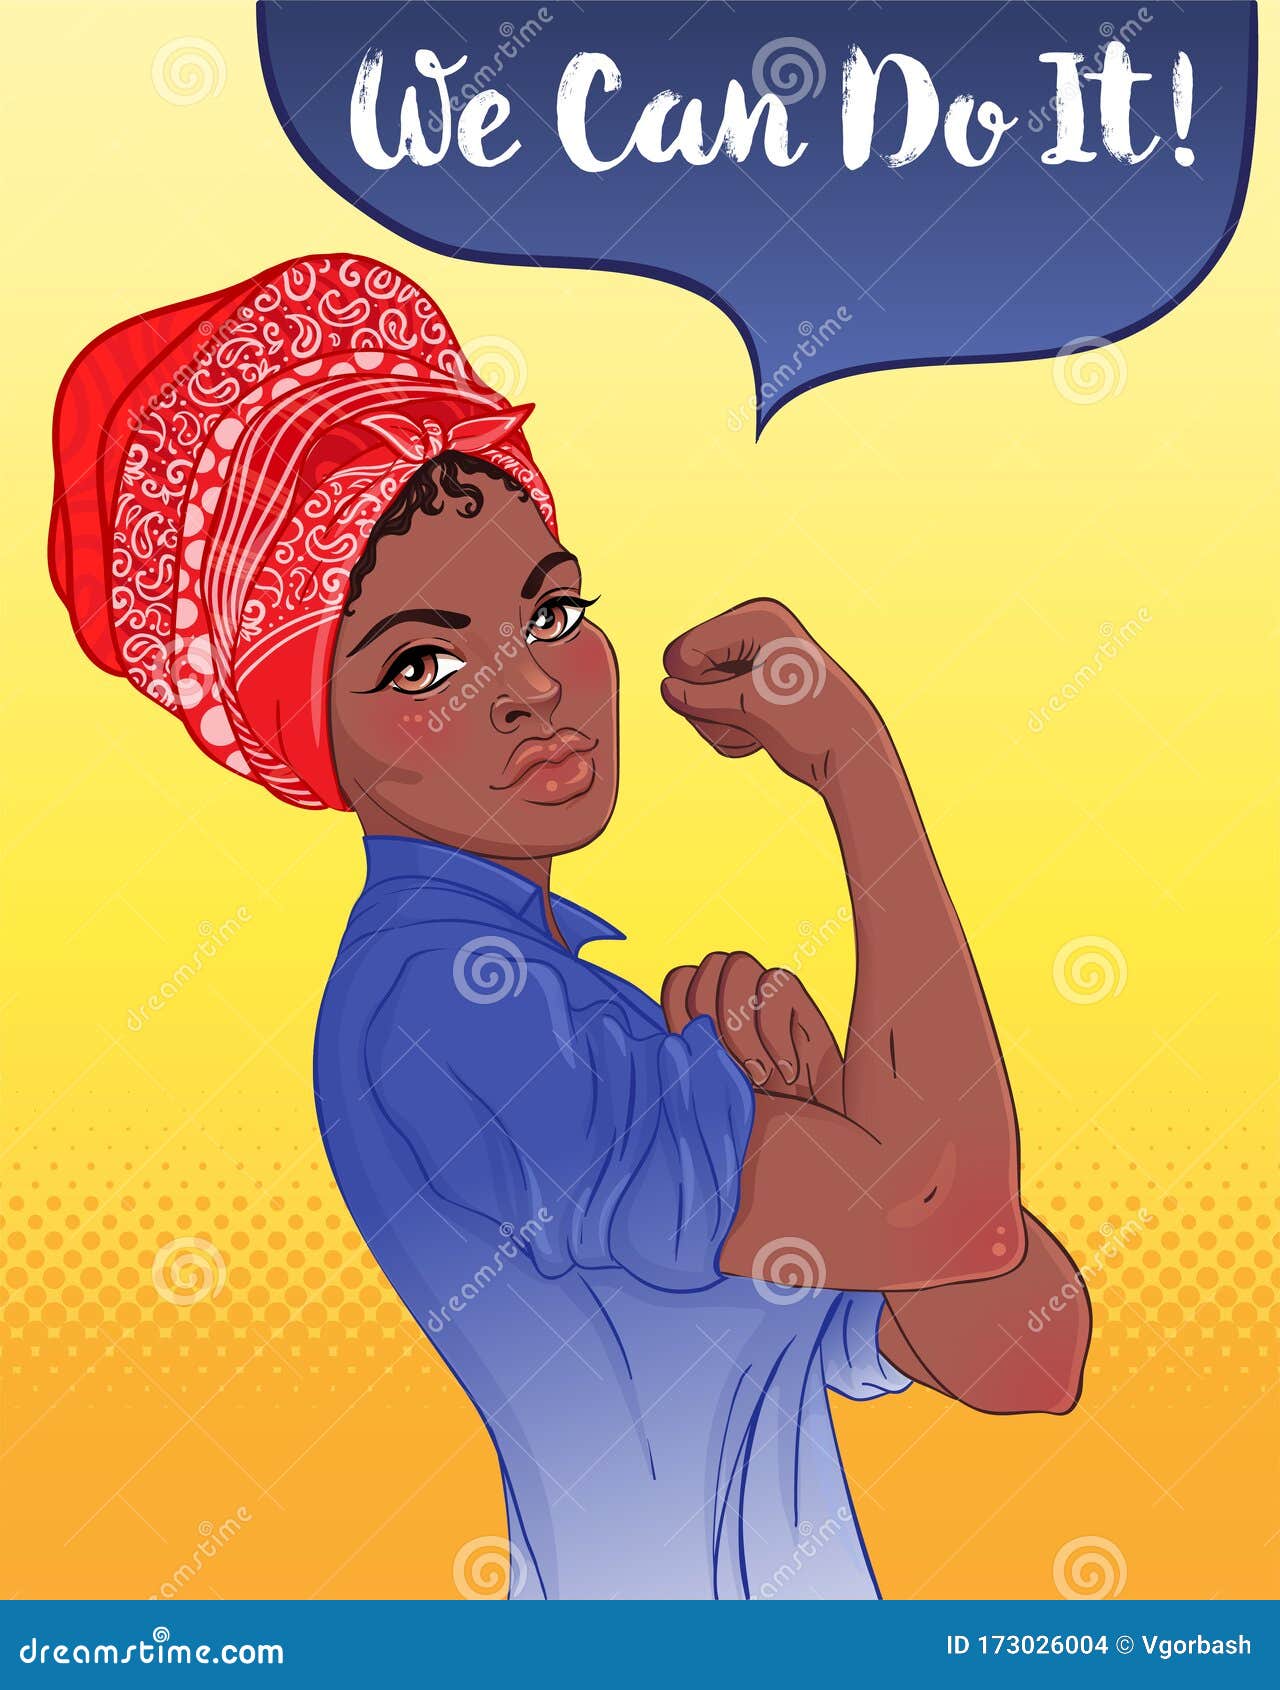 We Can Do It Design Inspired By Classic Feminist Poster Woman Empowerment Vector Illustration In Cartoon Style Stock Vector Illustration Of African Biceps